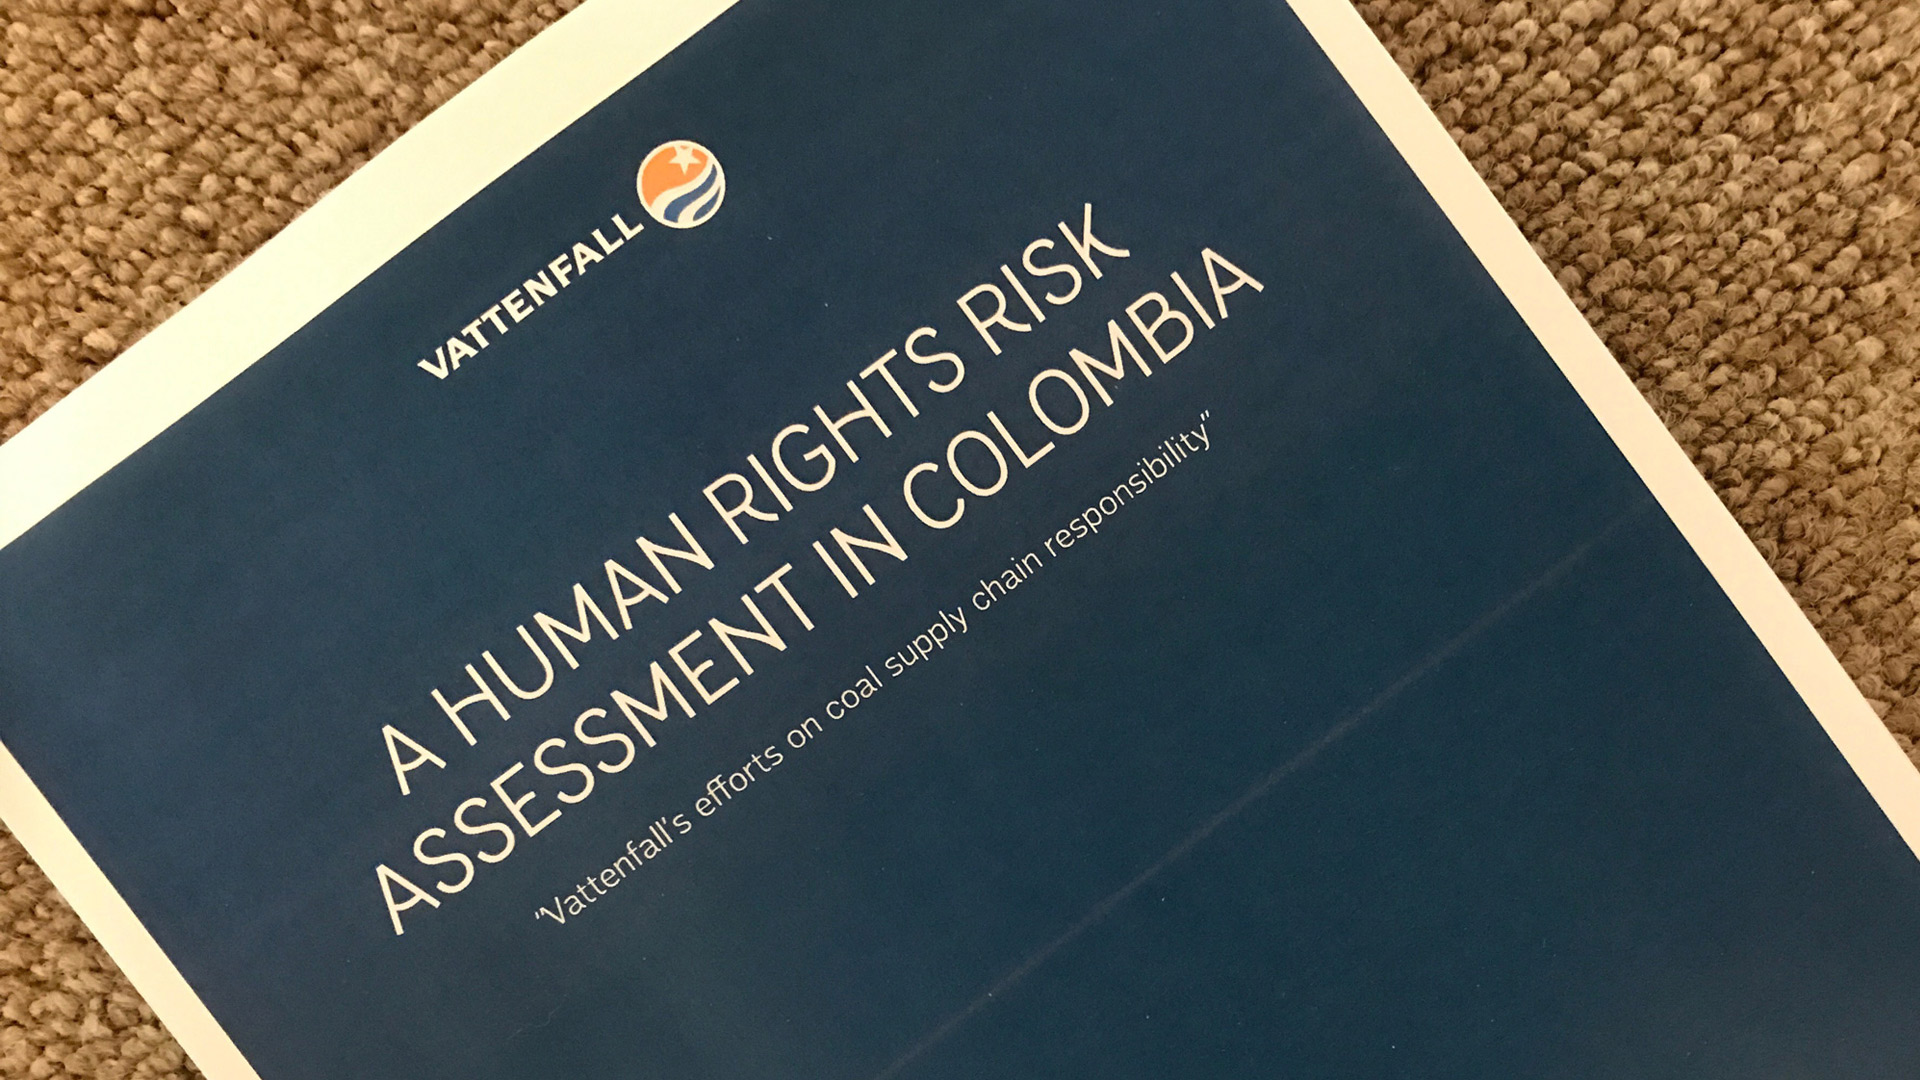 Vattenfalls rapport “A Human Rights Risk Assessment in Colombia”